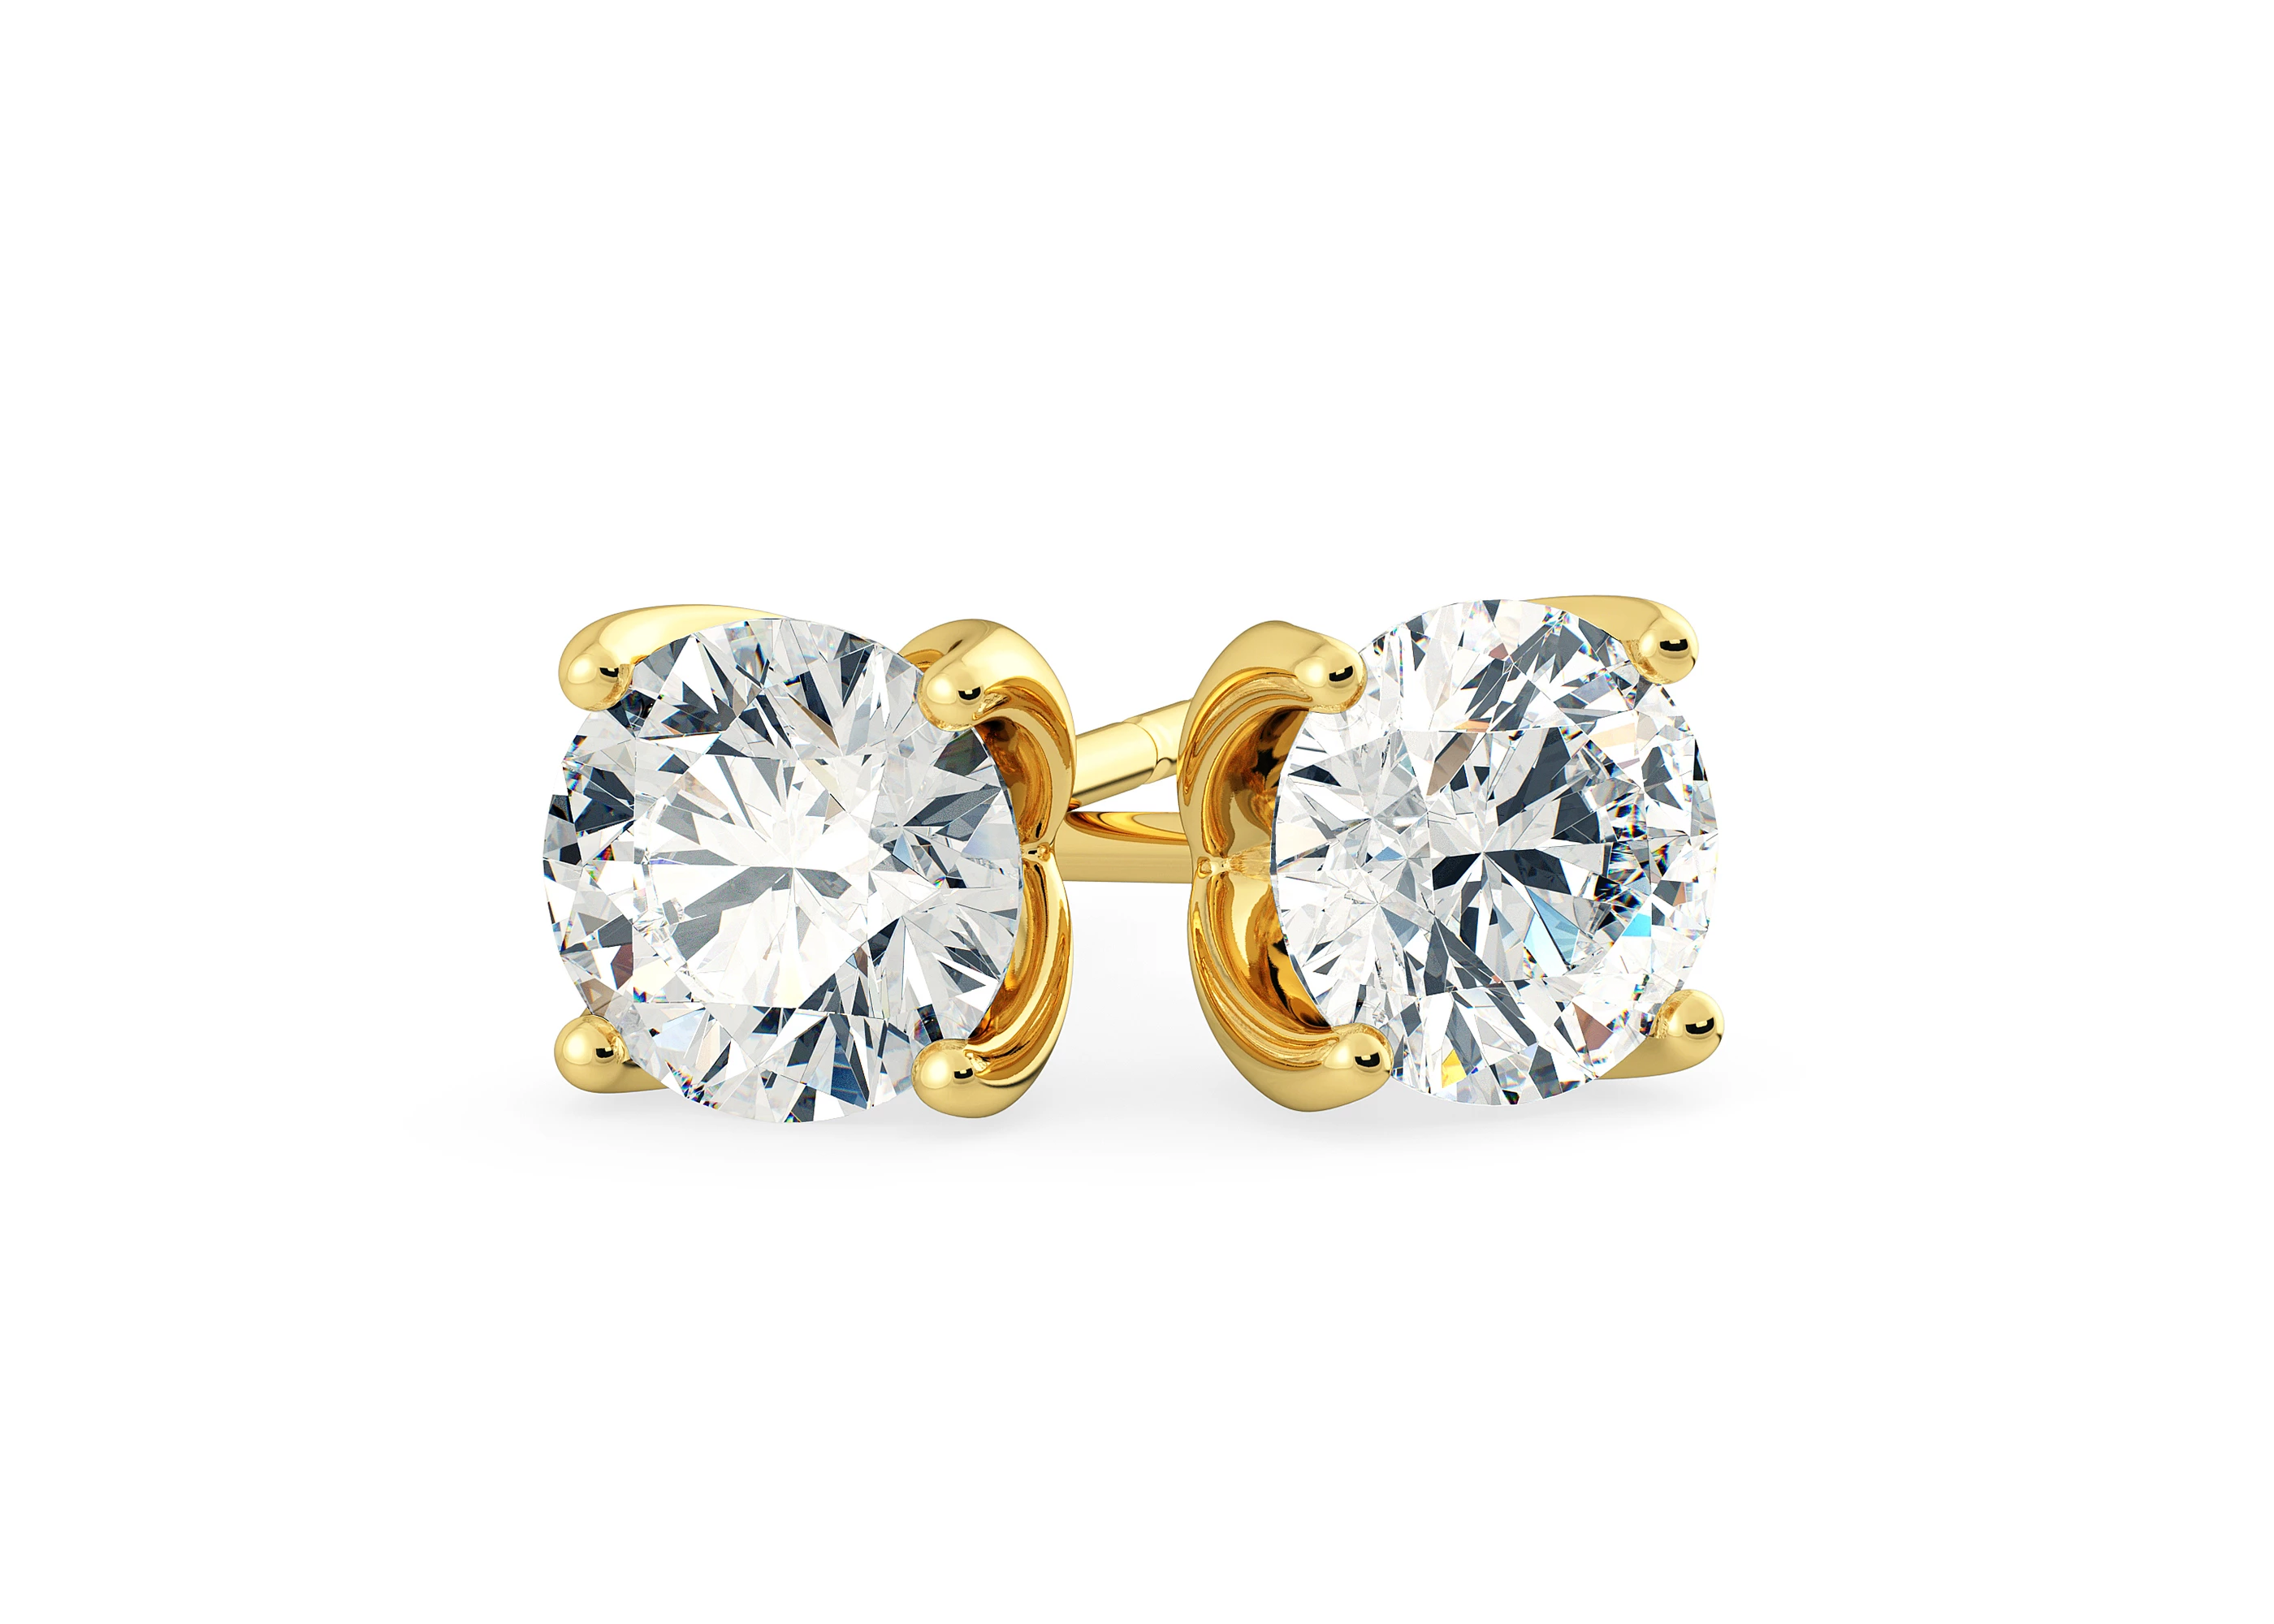 Mirabelle Round Brilliant Diamond Stud Earrings in 18K Yellow Gold with Alpha Backs